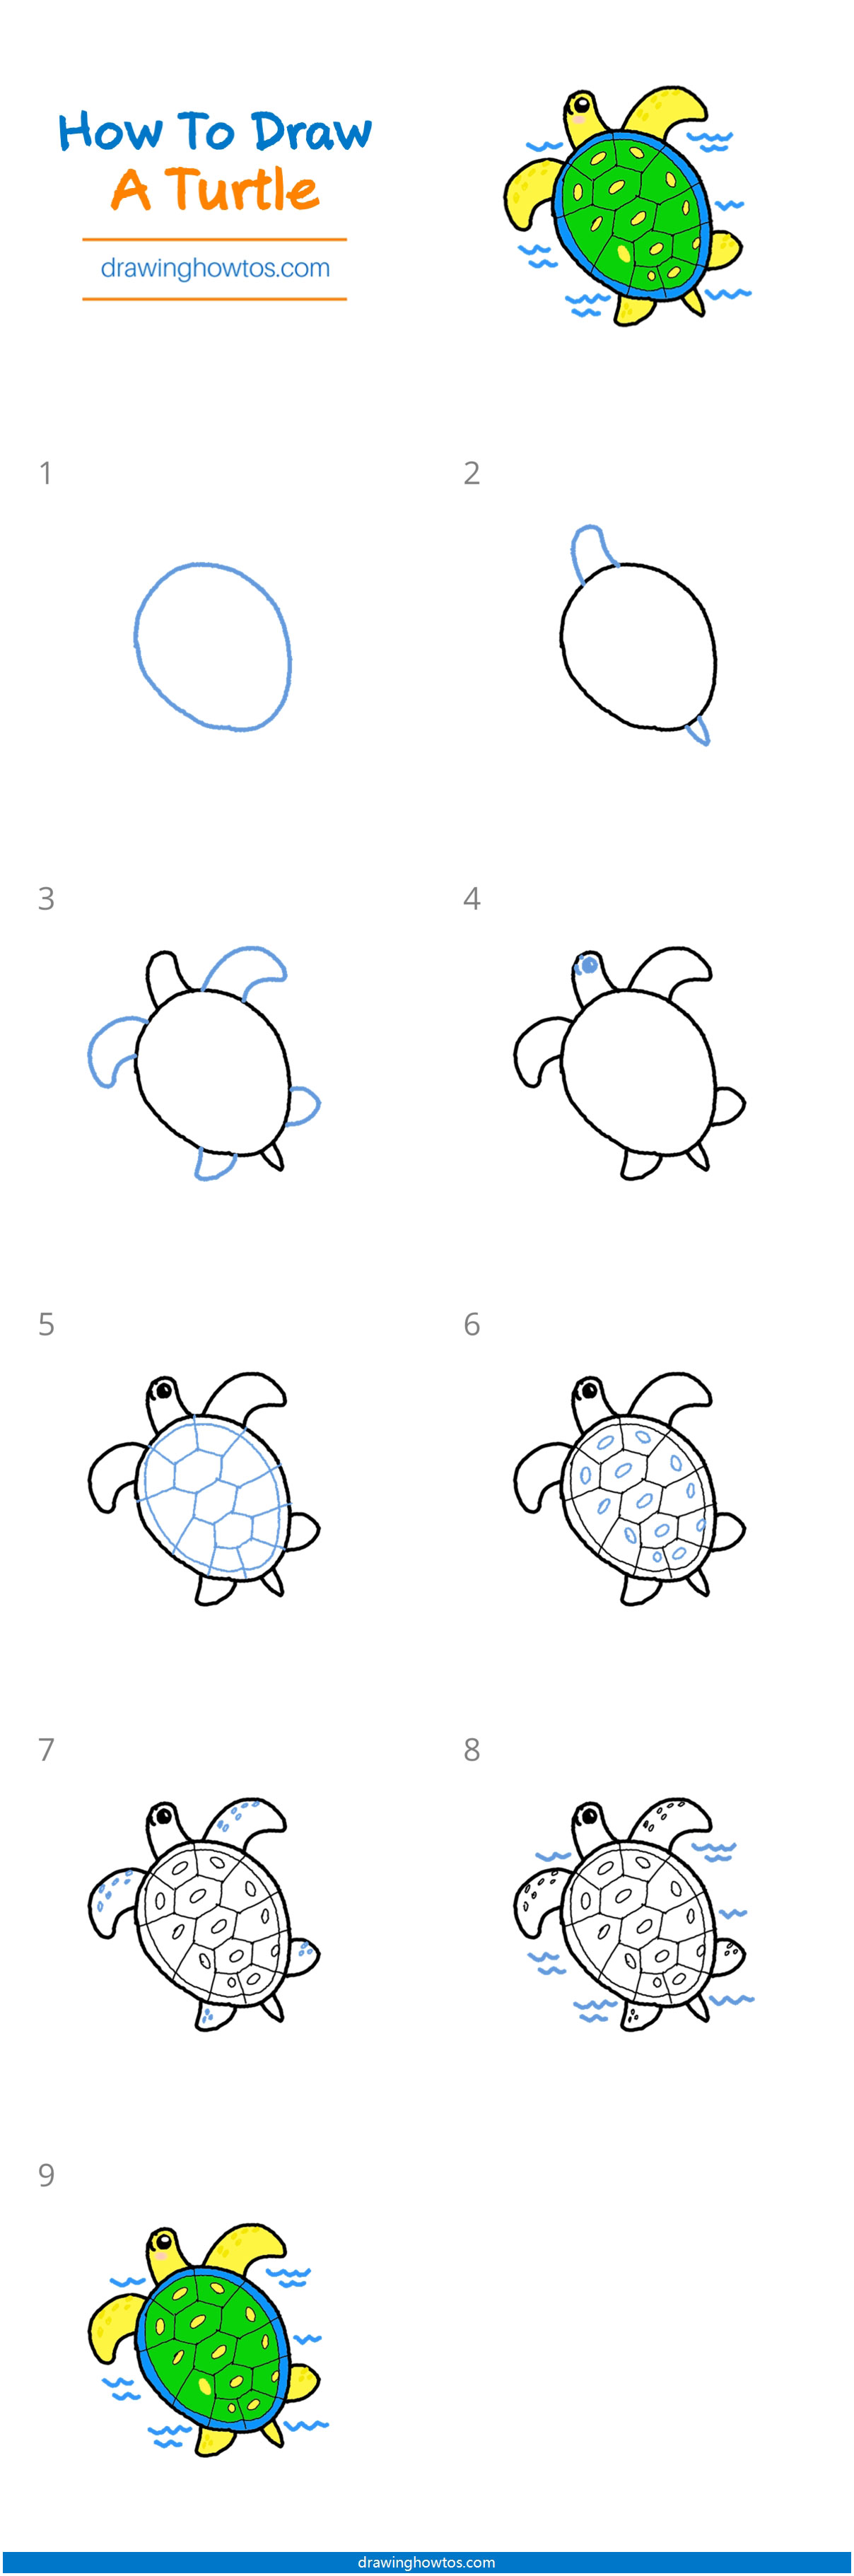 How to Draw a Turtle - Step by Step Easy Drawing Guides - Drawing Howtos